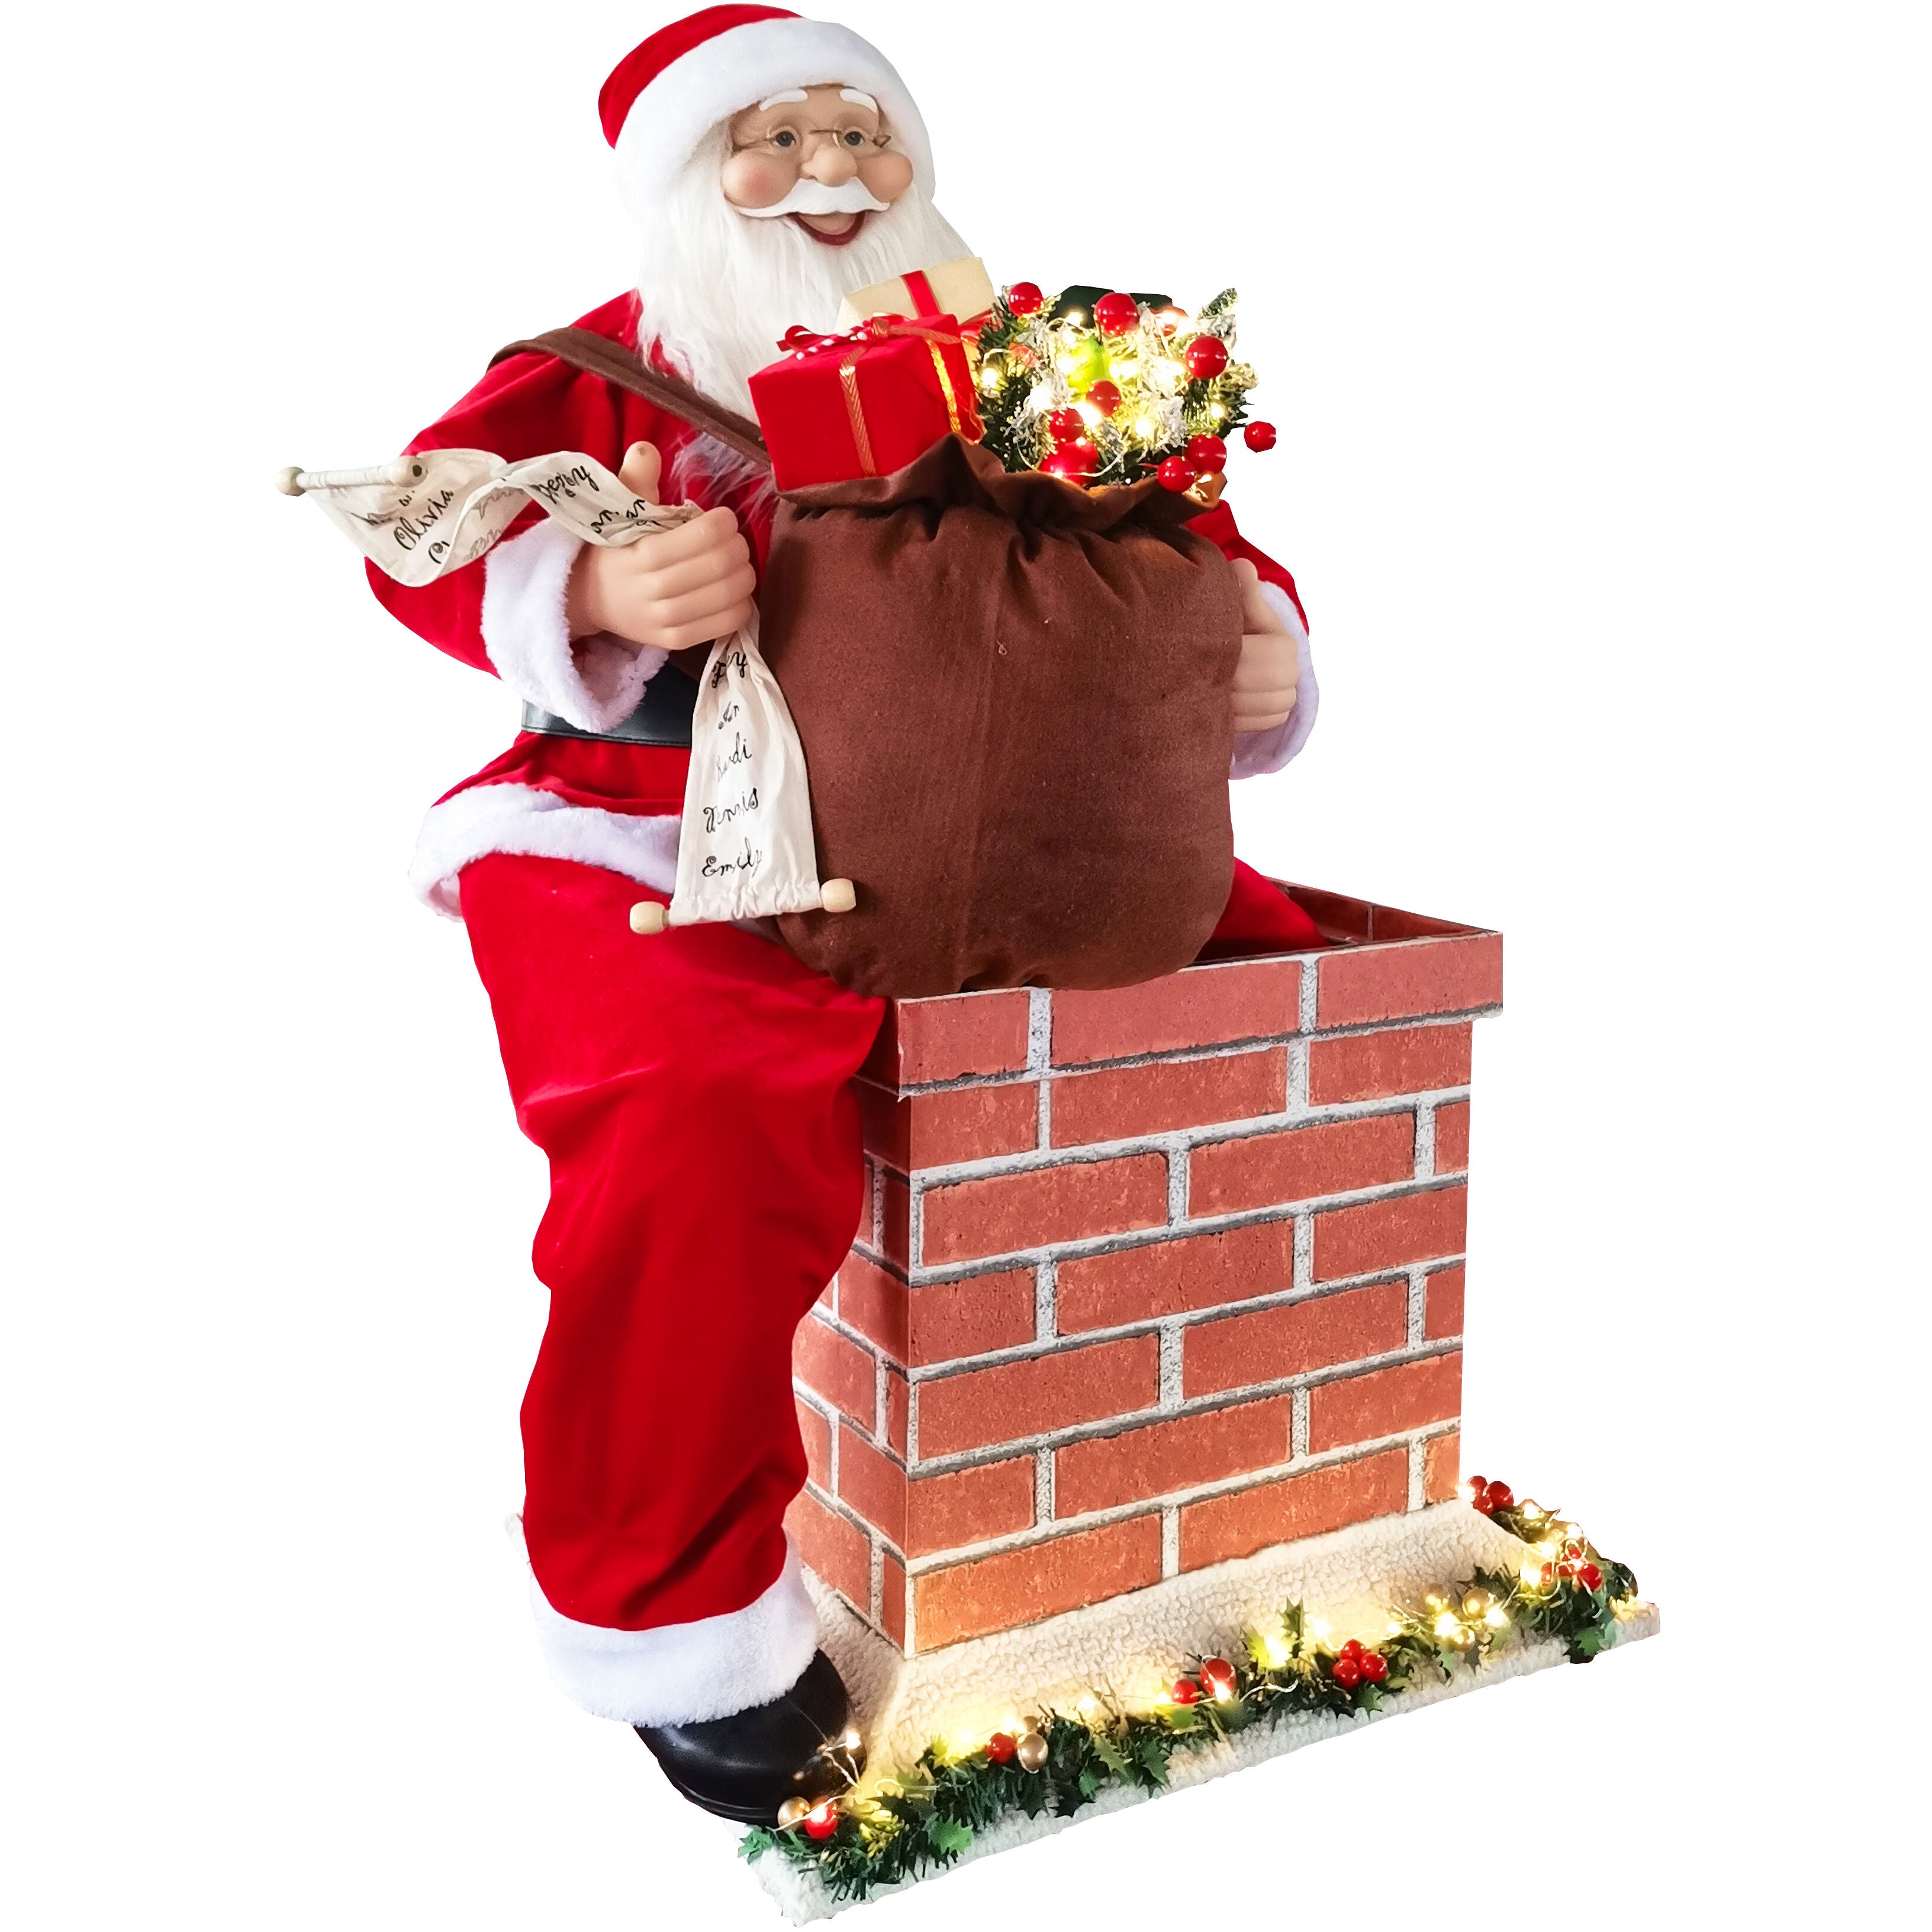 Fraser Hill Farm - 48-In. Life-Size Santa in Chimney with Toy Sack and Lights, Motion-Activated Christmas Animatronic